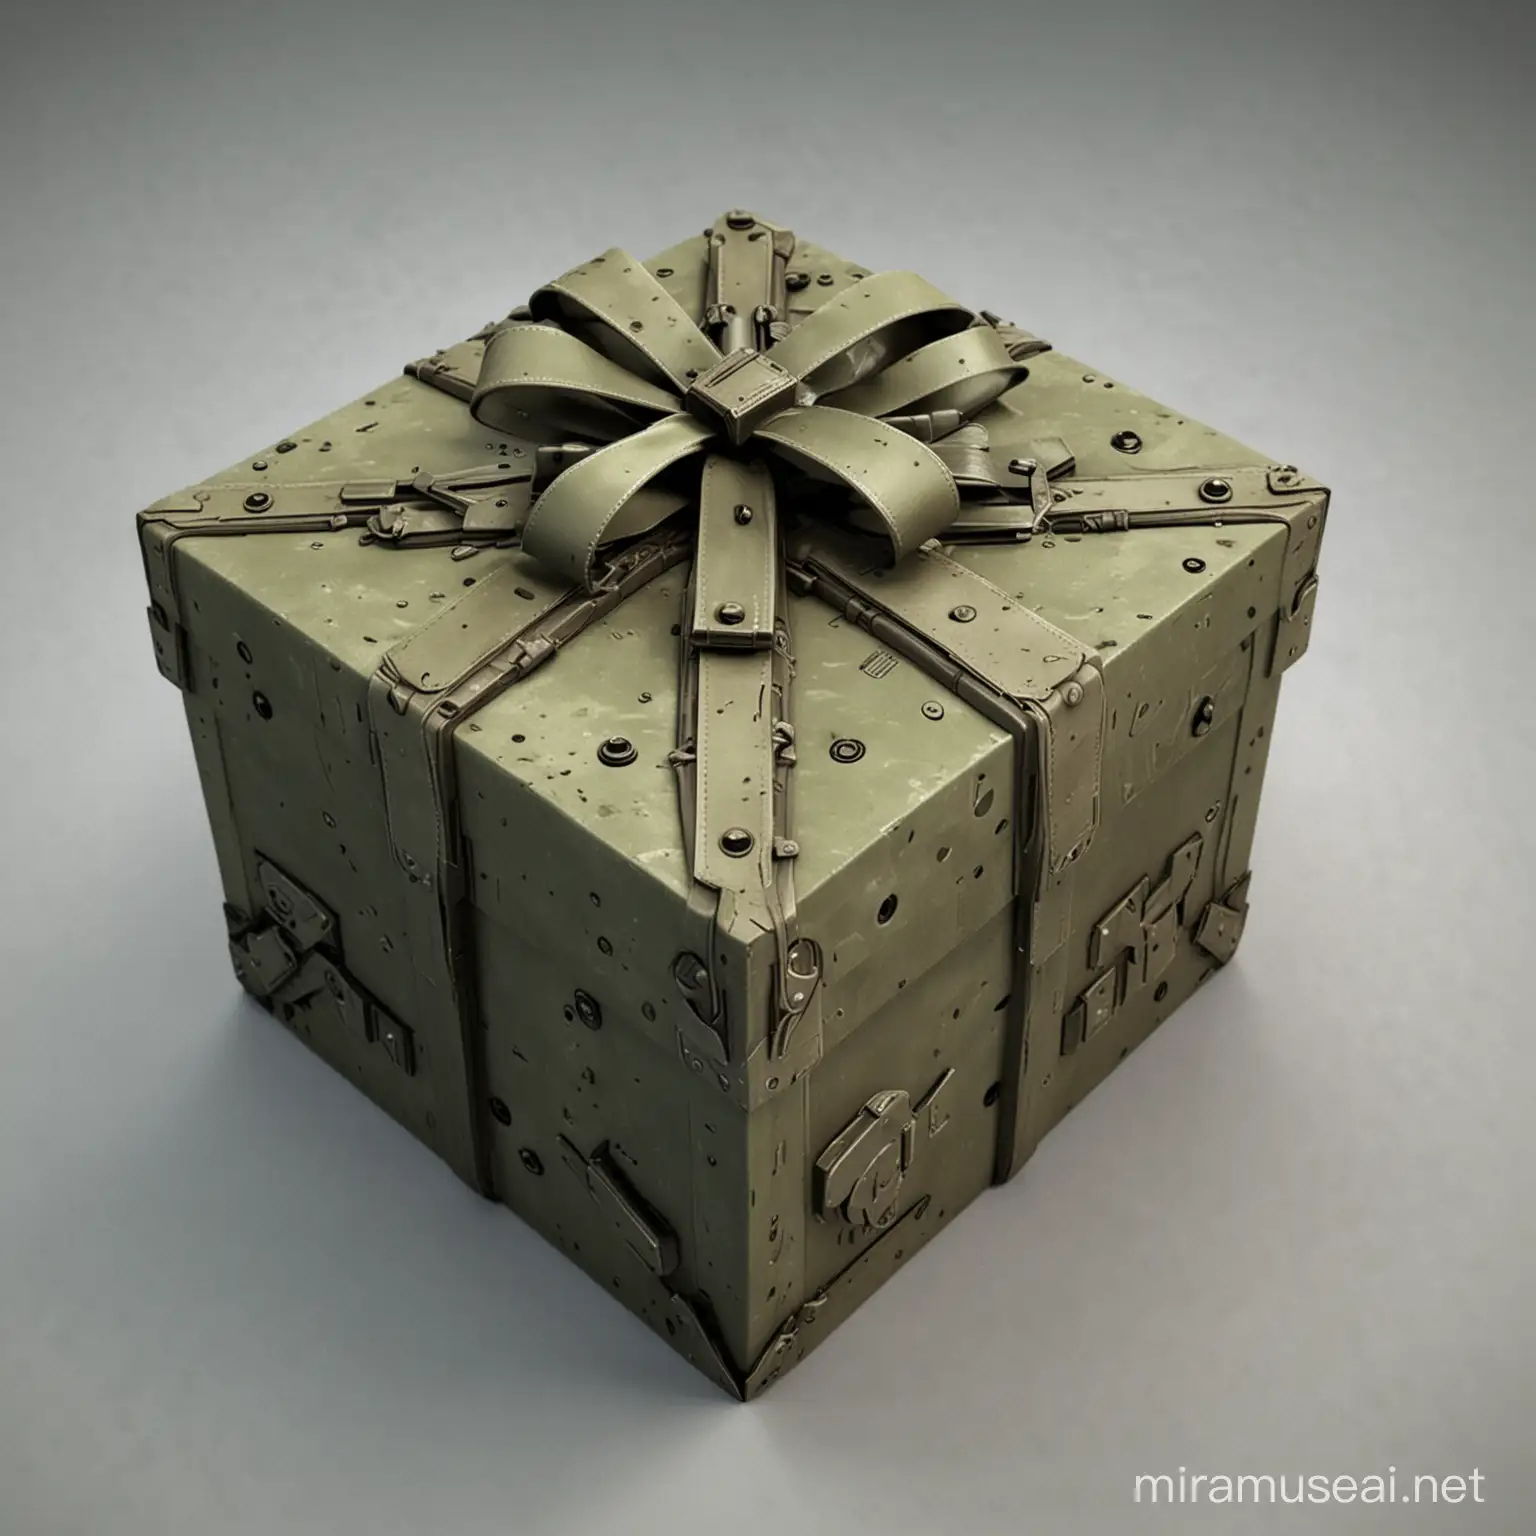 3D Combat Arms Gift Box Sculpture with Dynamic Style